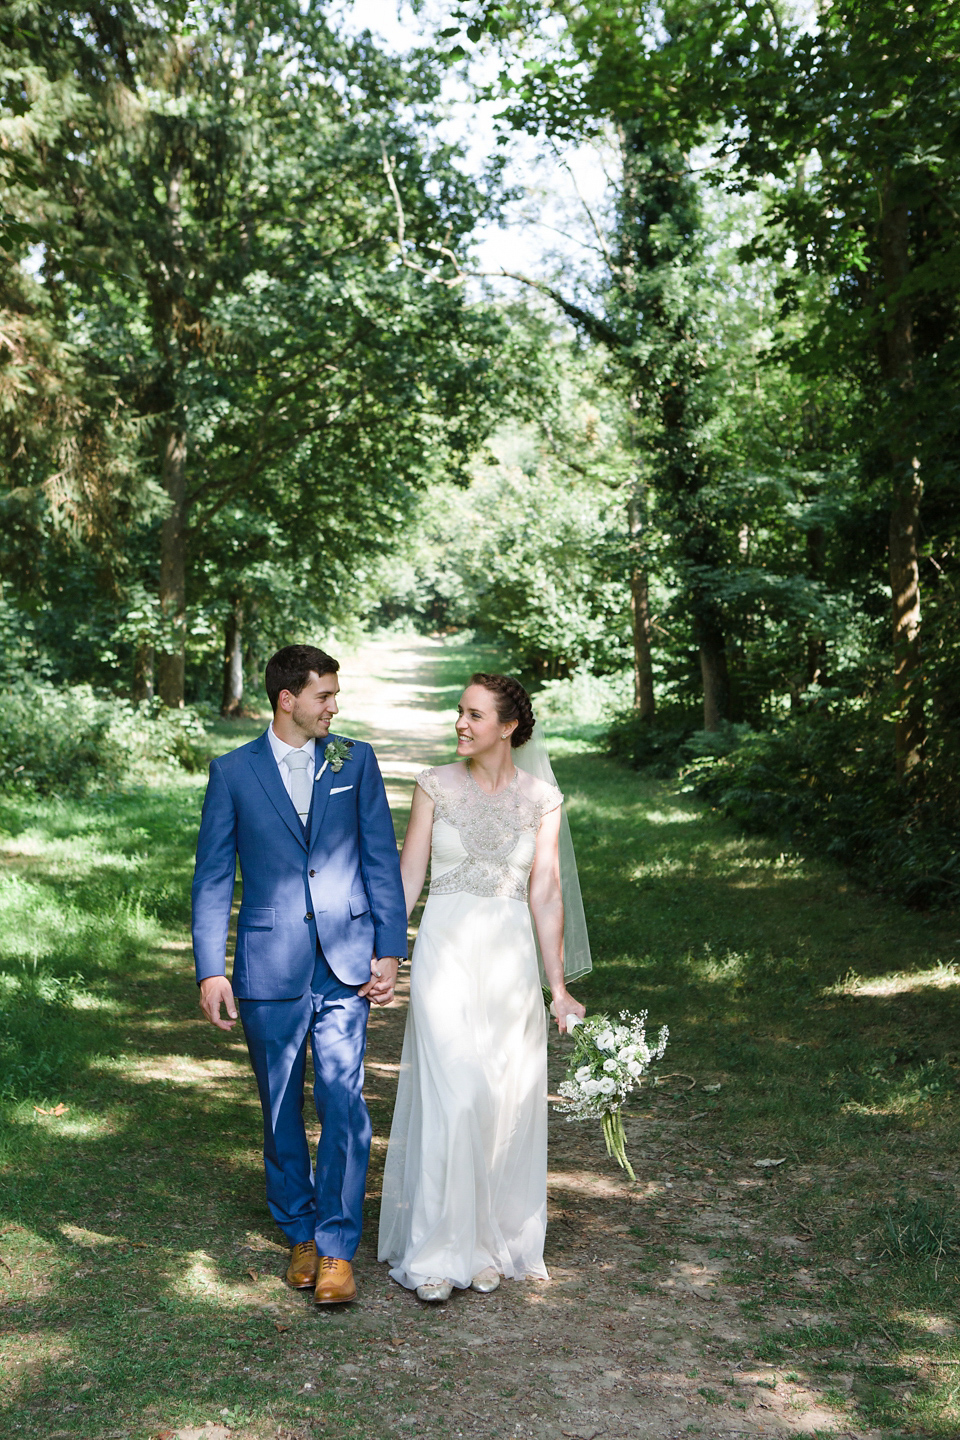 A glamorous Gwendolynne gown for a Summer garden party wedding. Photography by Lucy Davenport.